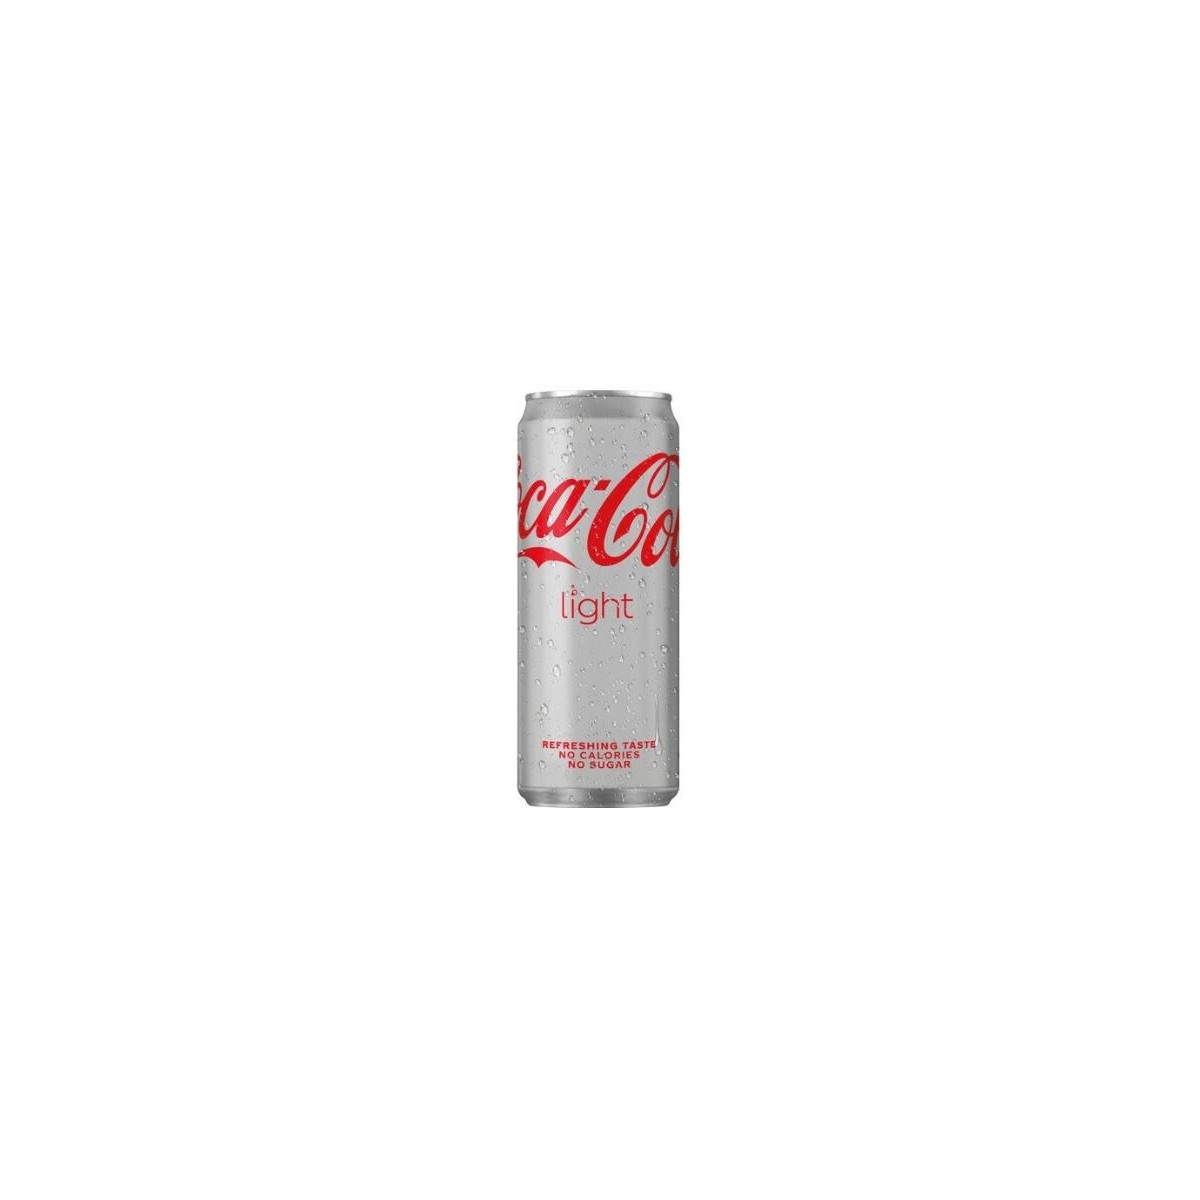 COCA COLA LIGHT  24 X 33CL CAN  TRAY